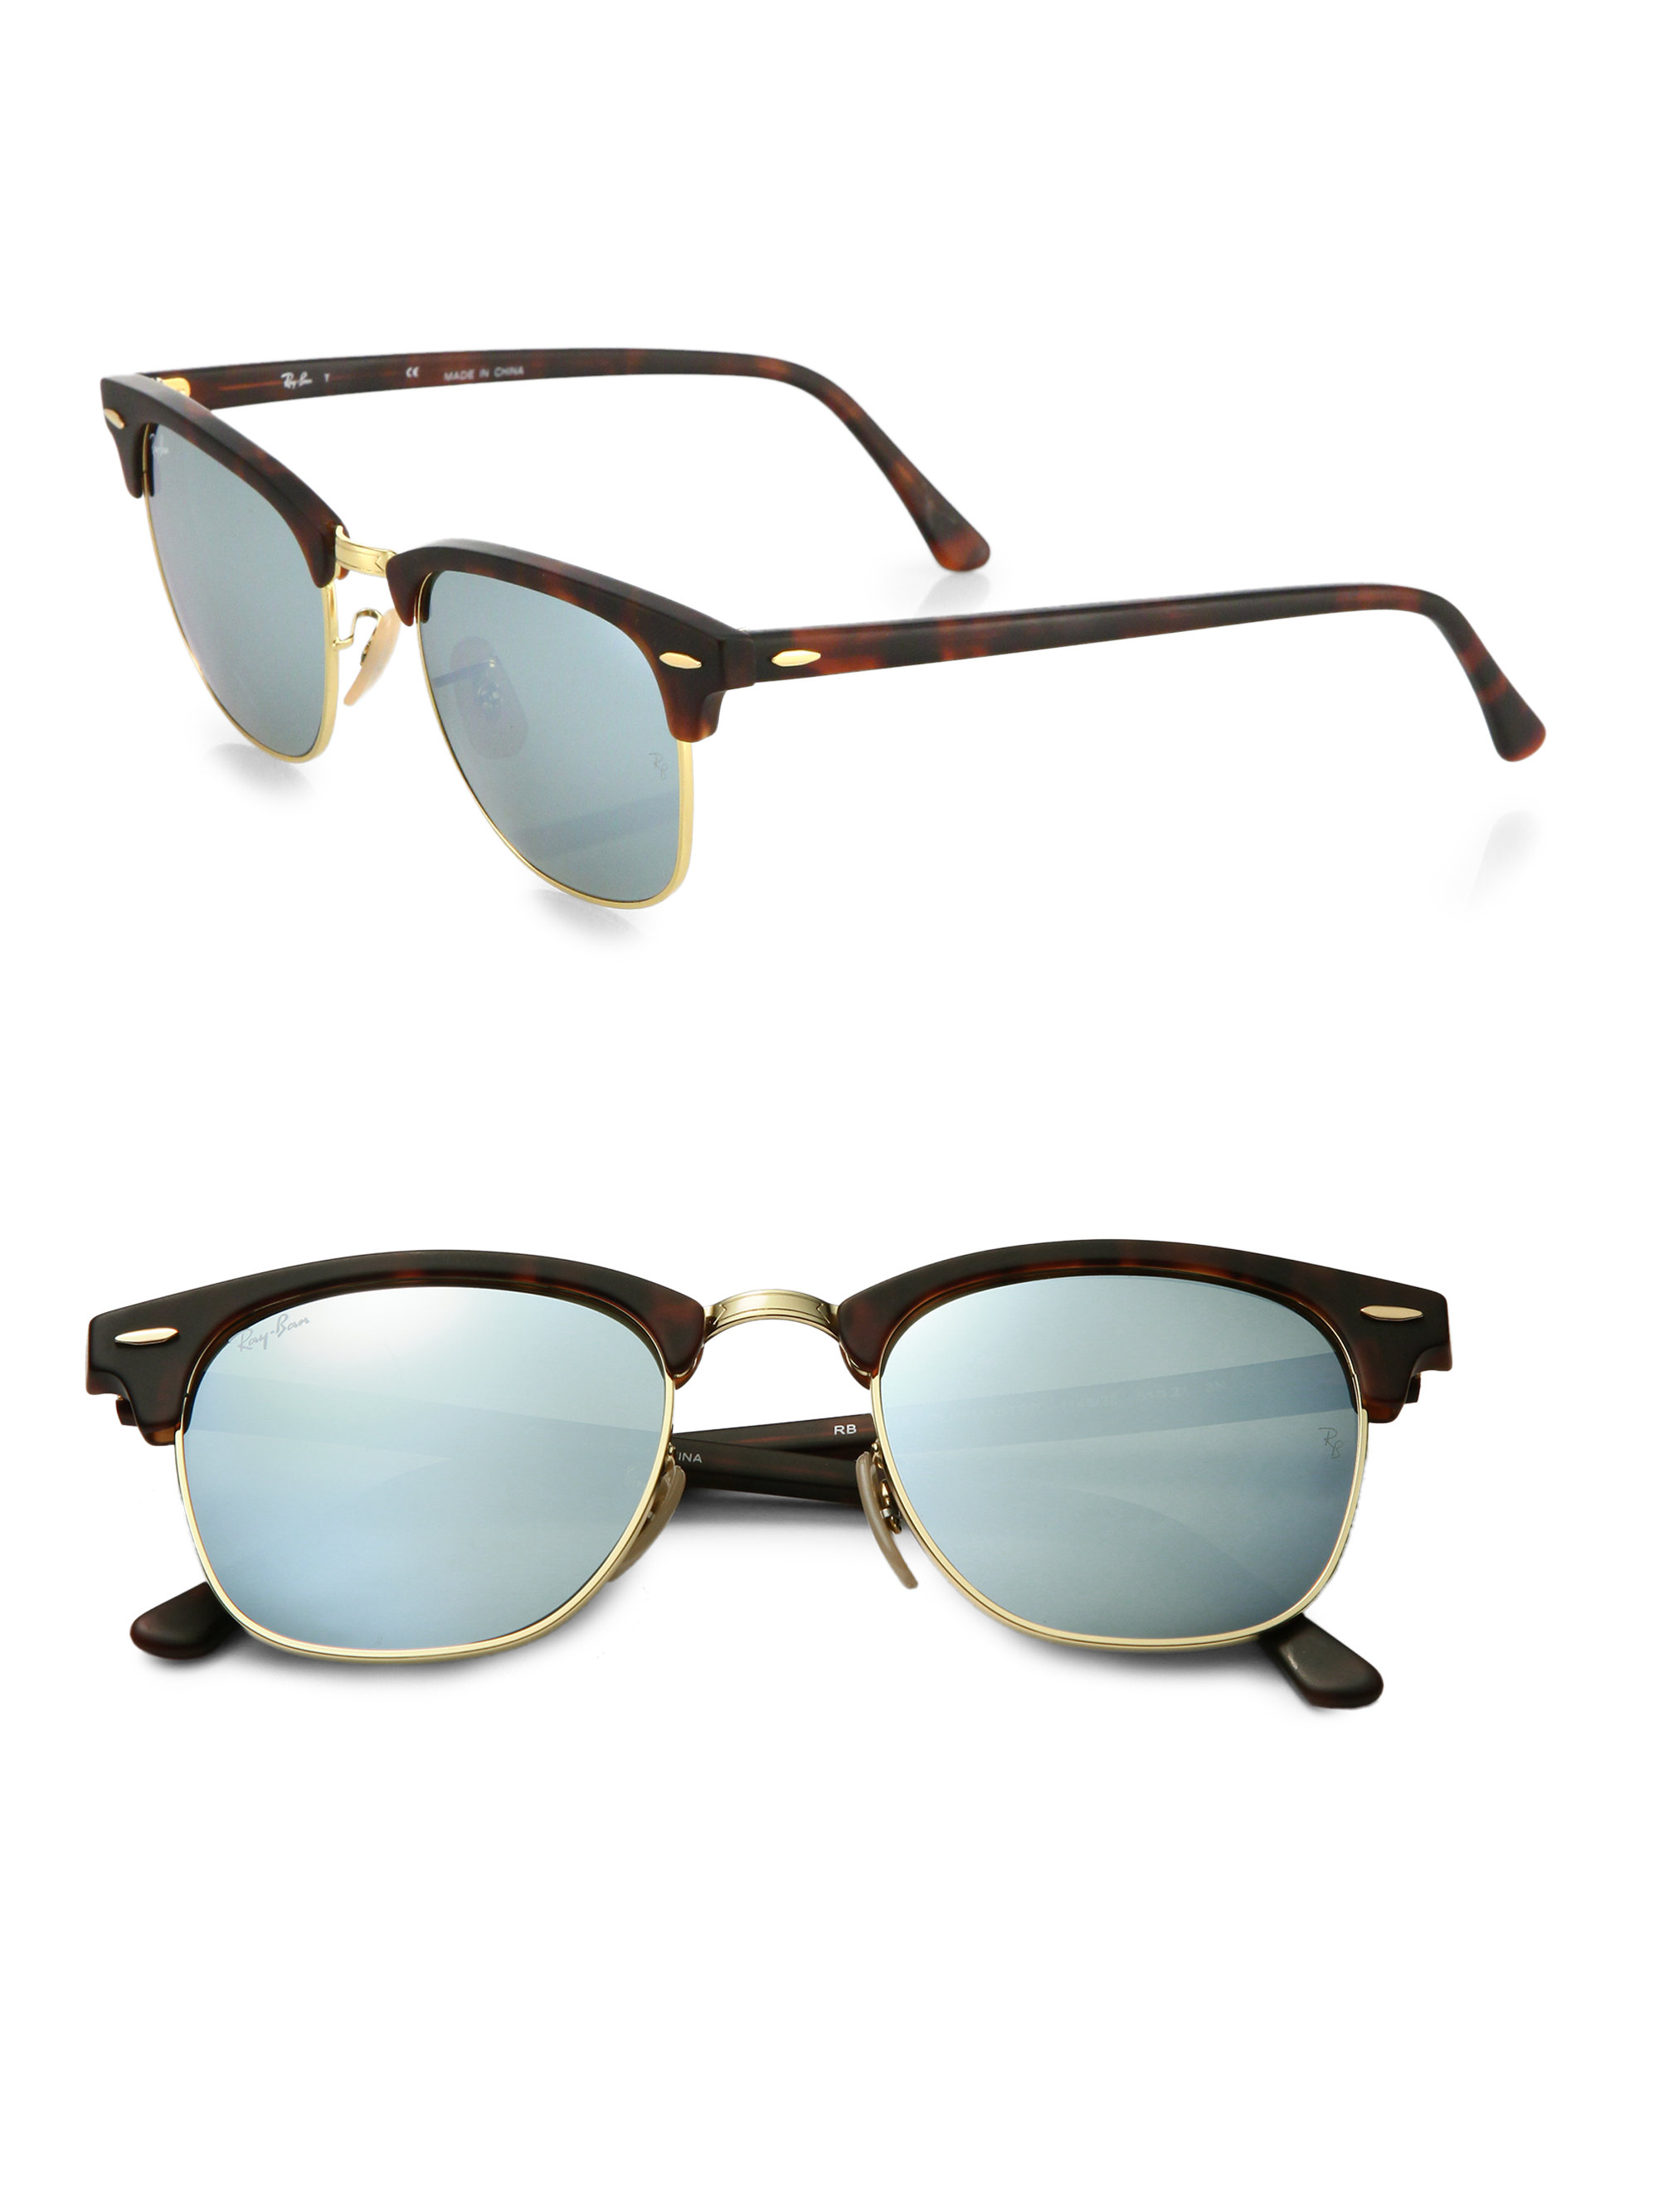 2019 buy cheap ray ban sunglasses online india online 2019